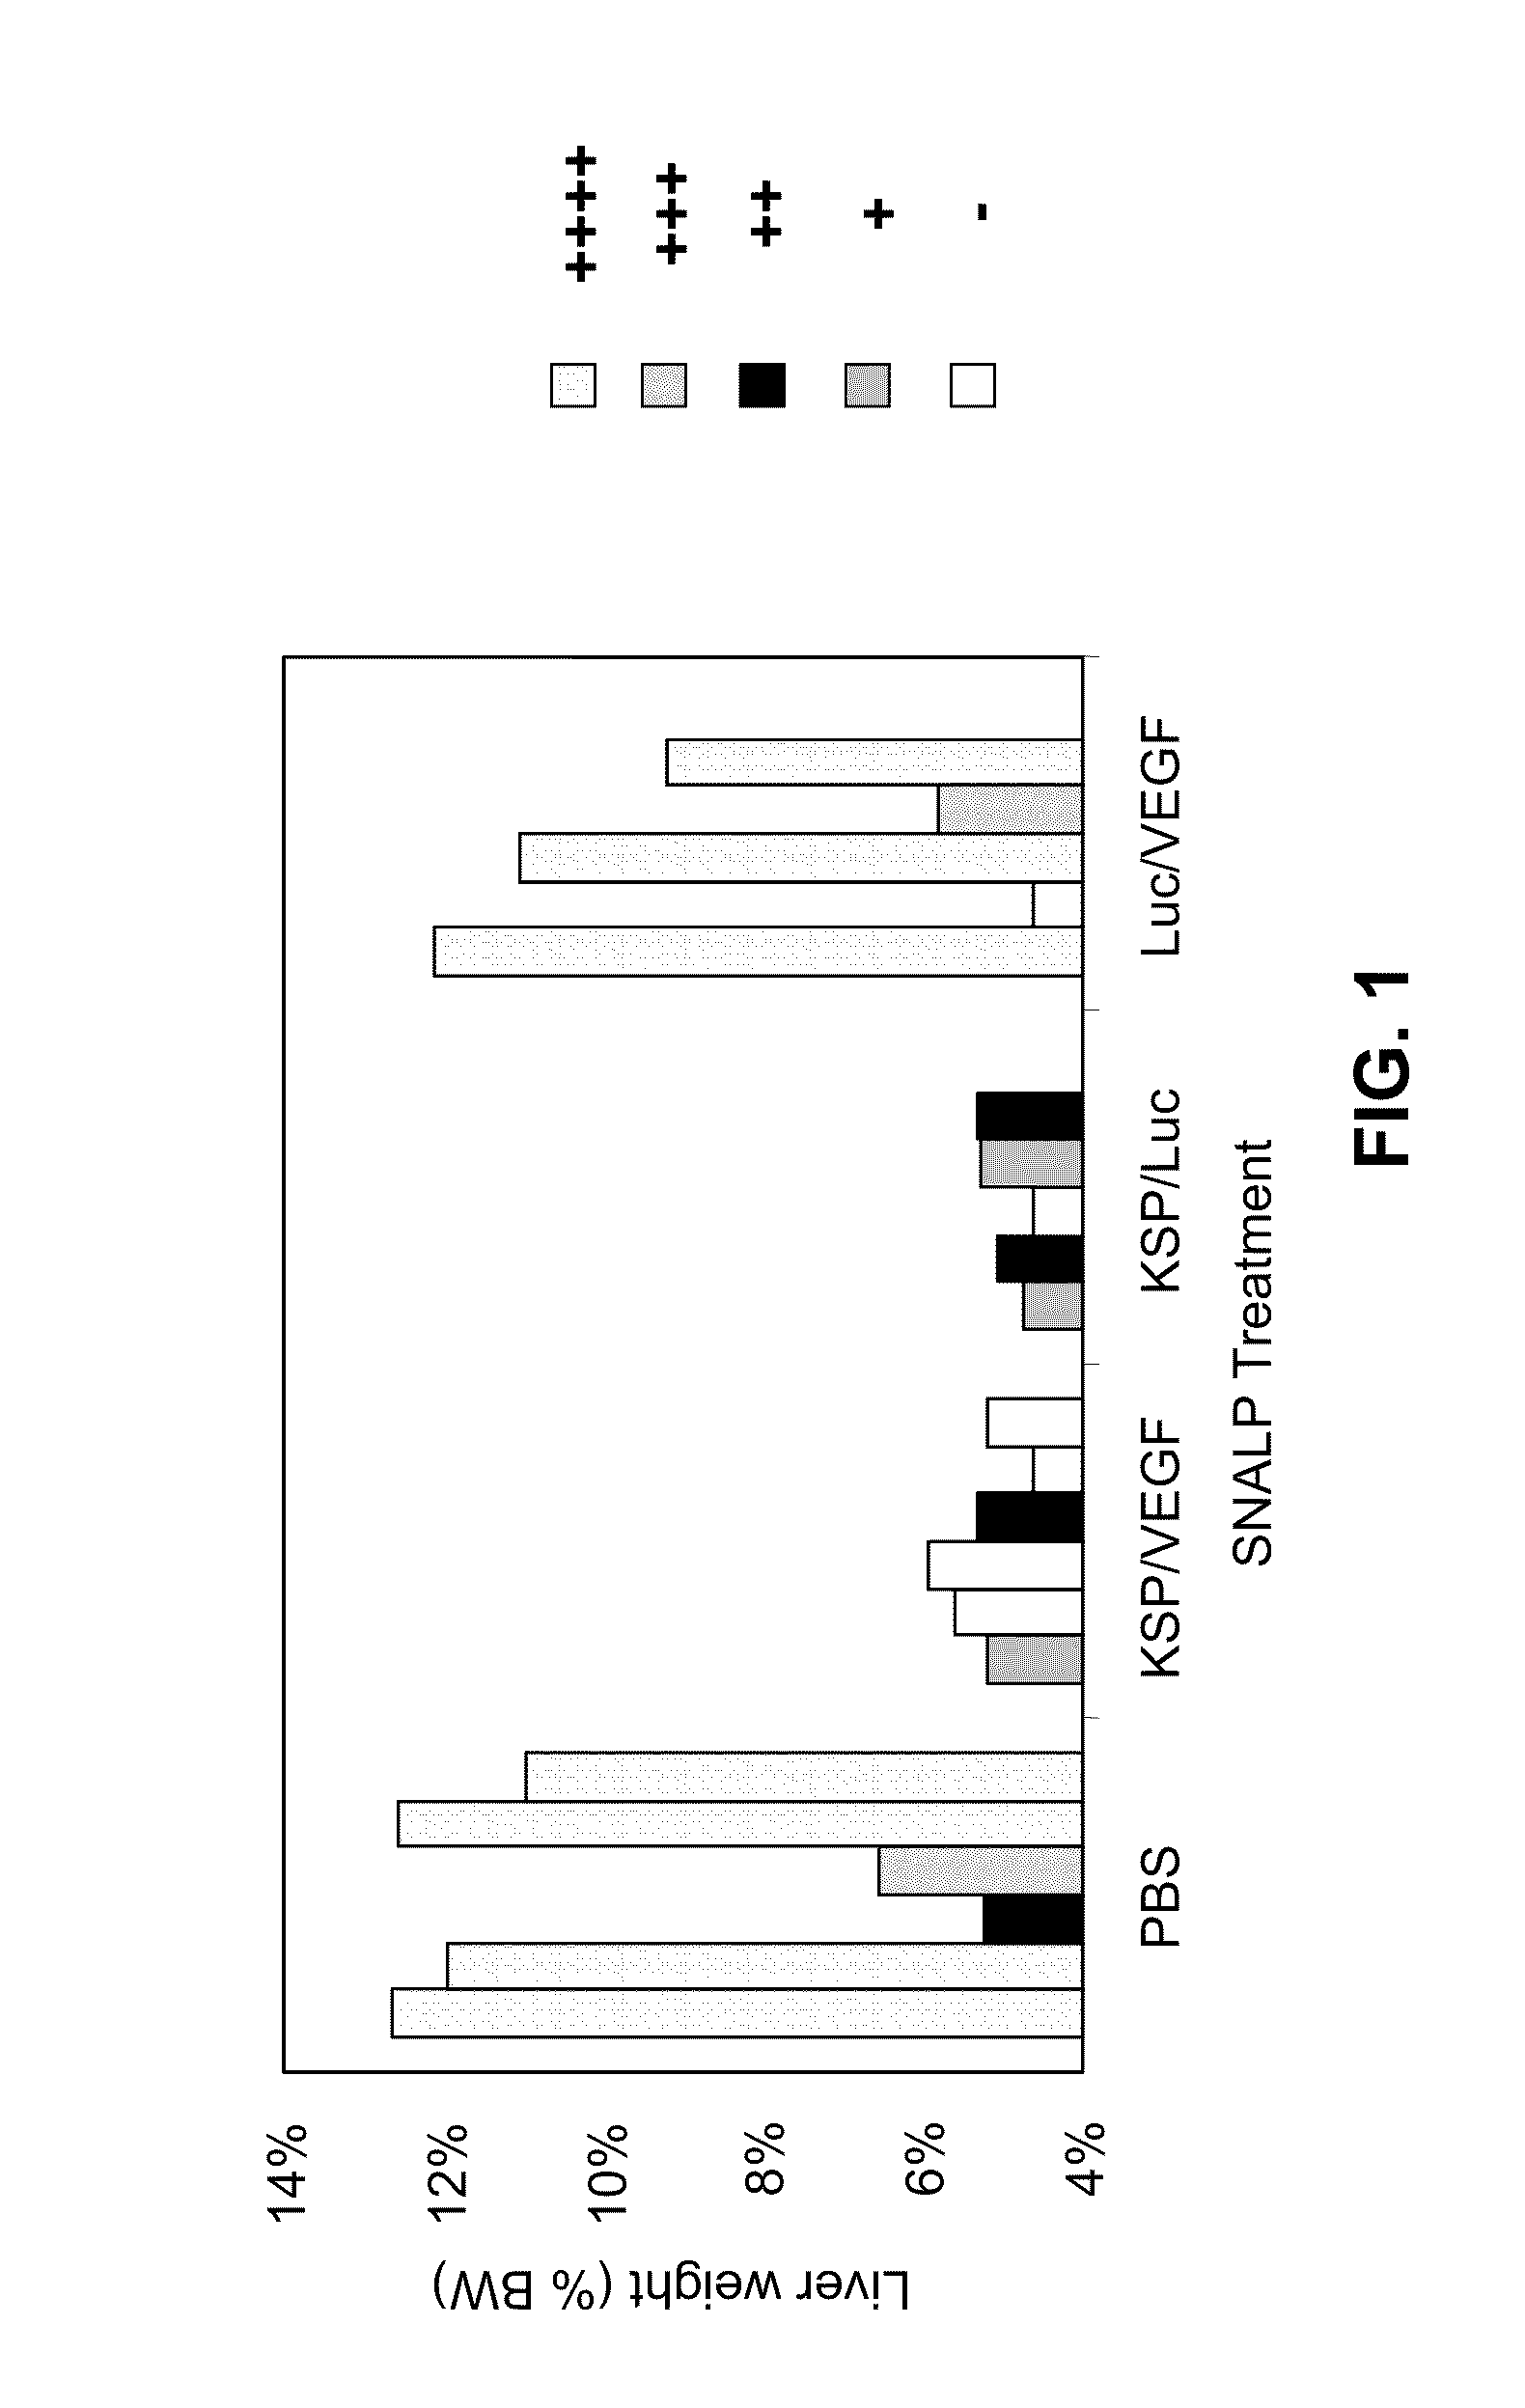 Compositions and Methods for Inhibiting Expression of Eg5 and VEGF Genes